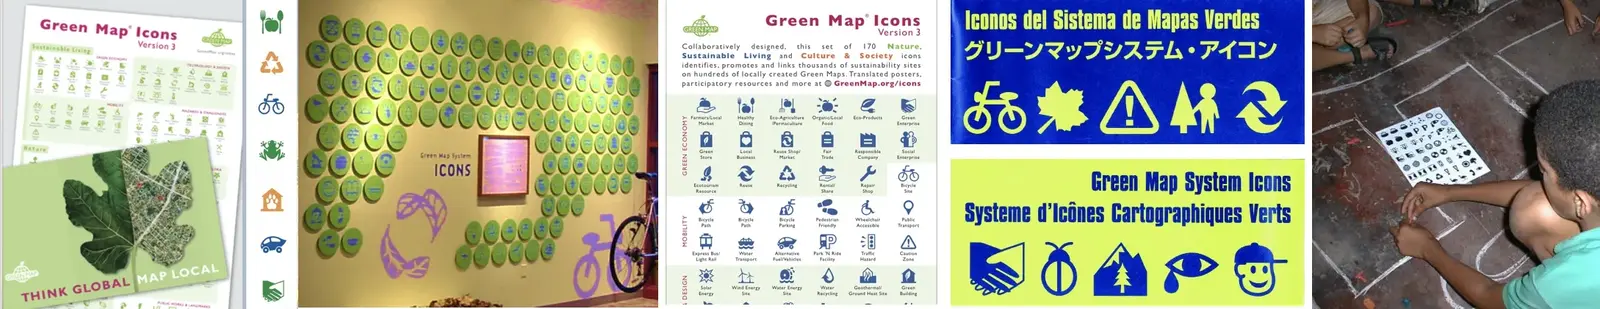 Green Map Icons over the years, in Milwaukee, Havana, NYC and 